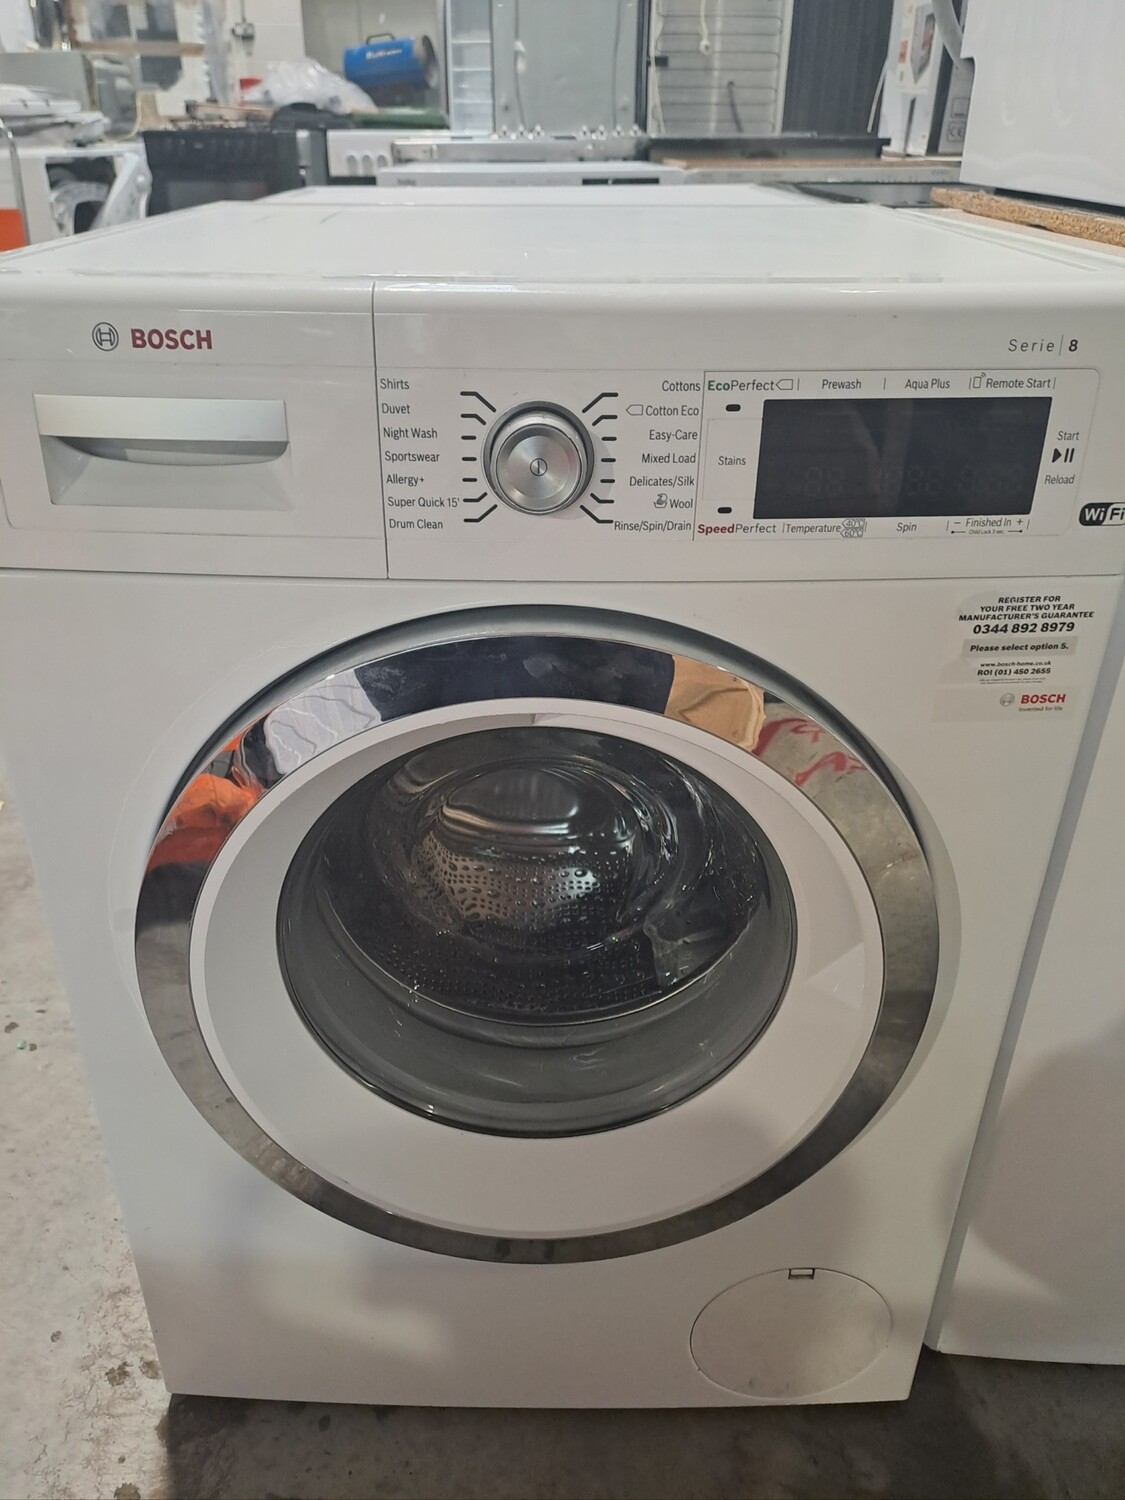 Bosch Serie 8 WAW258H0GB/14 9kg Load 1400 Spin Washing Machine - White - Refurbished - 6 Month Guarantee. This item is located at our Whitby Road Shop